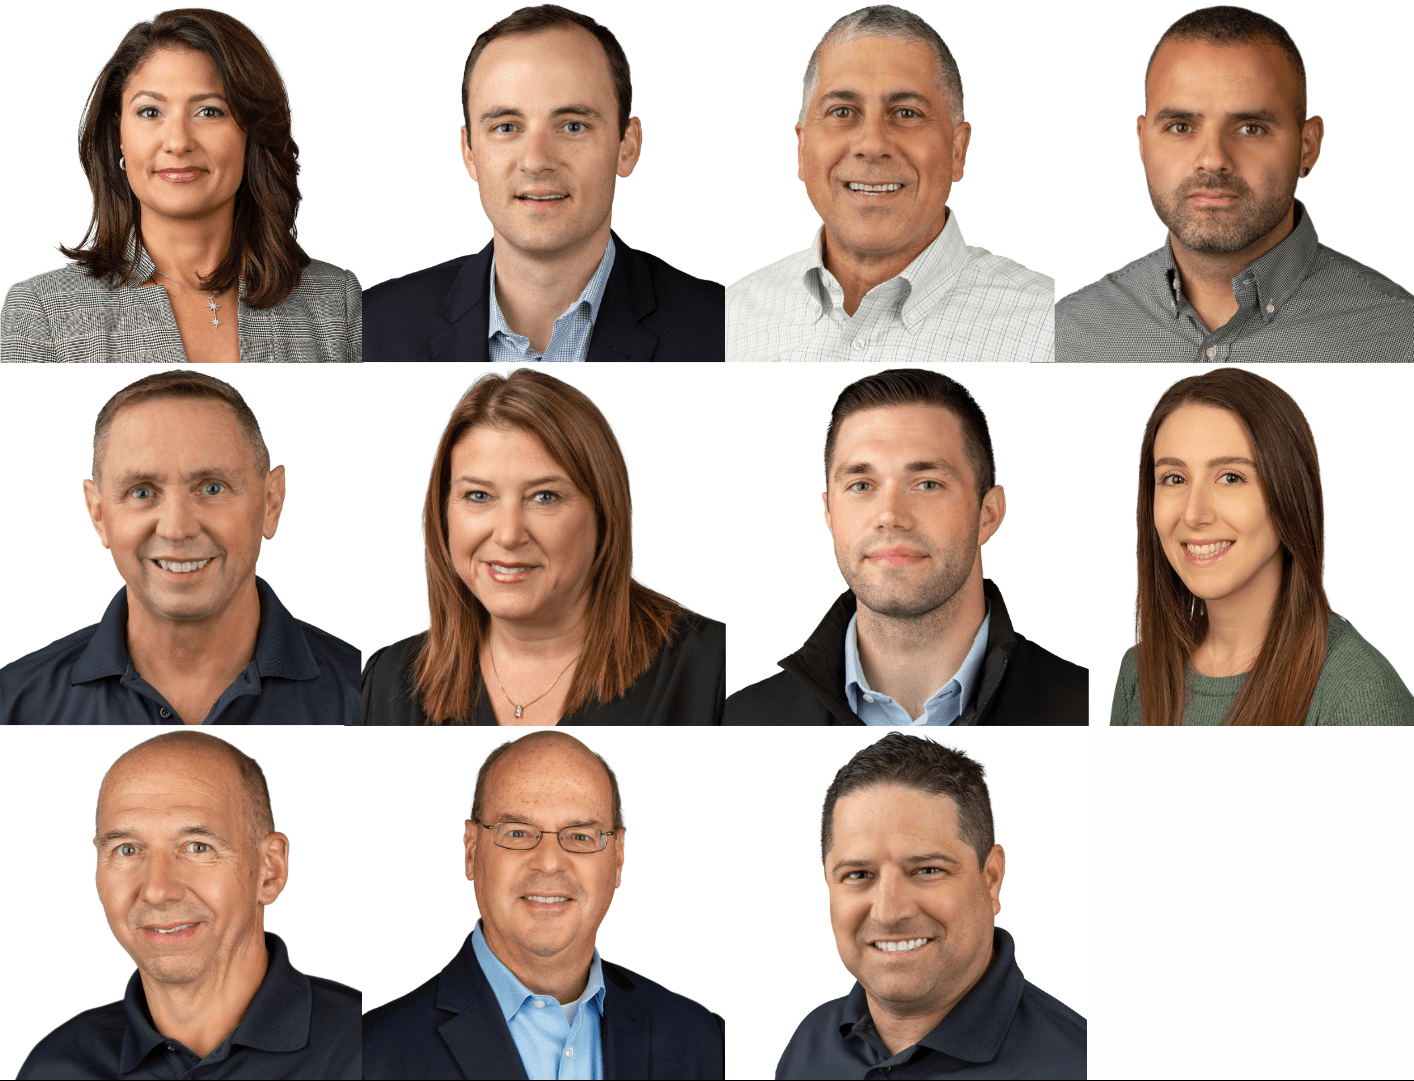 RECRUITING THE INDUSTRY’S BEST: WISE CONSTRUCTION’S NEWEST TEAM MEMBERS